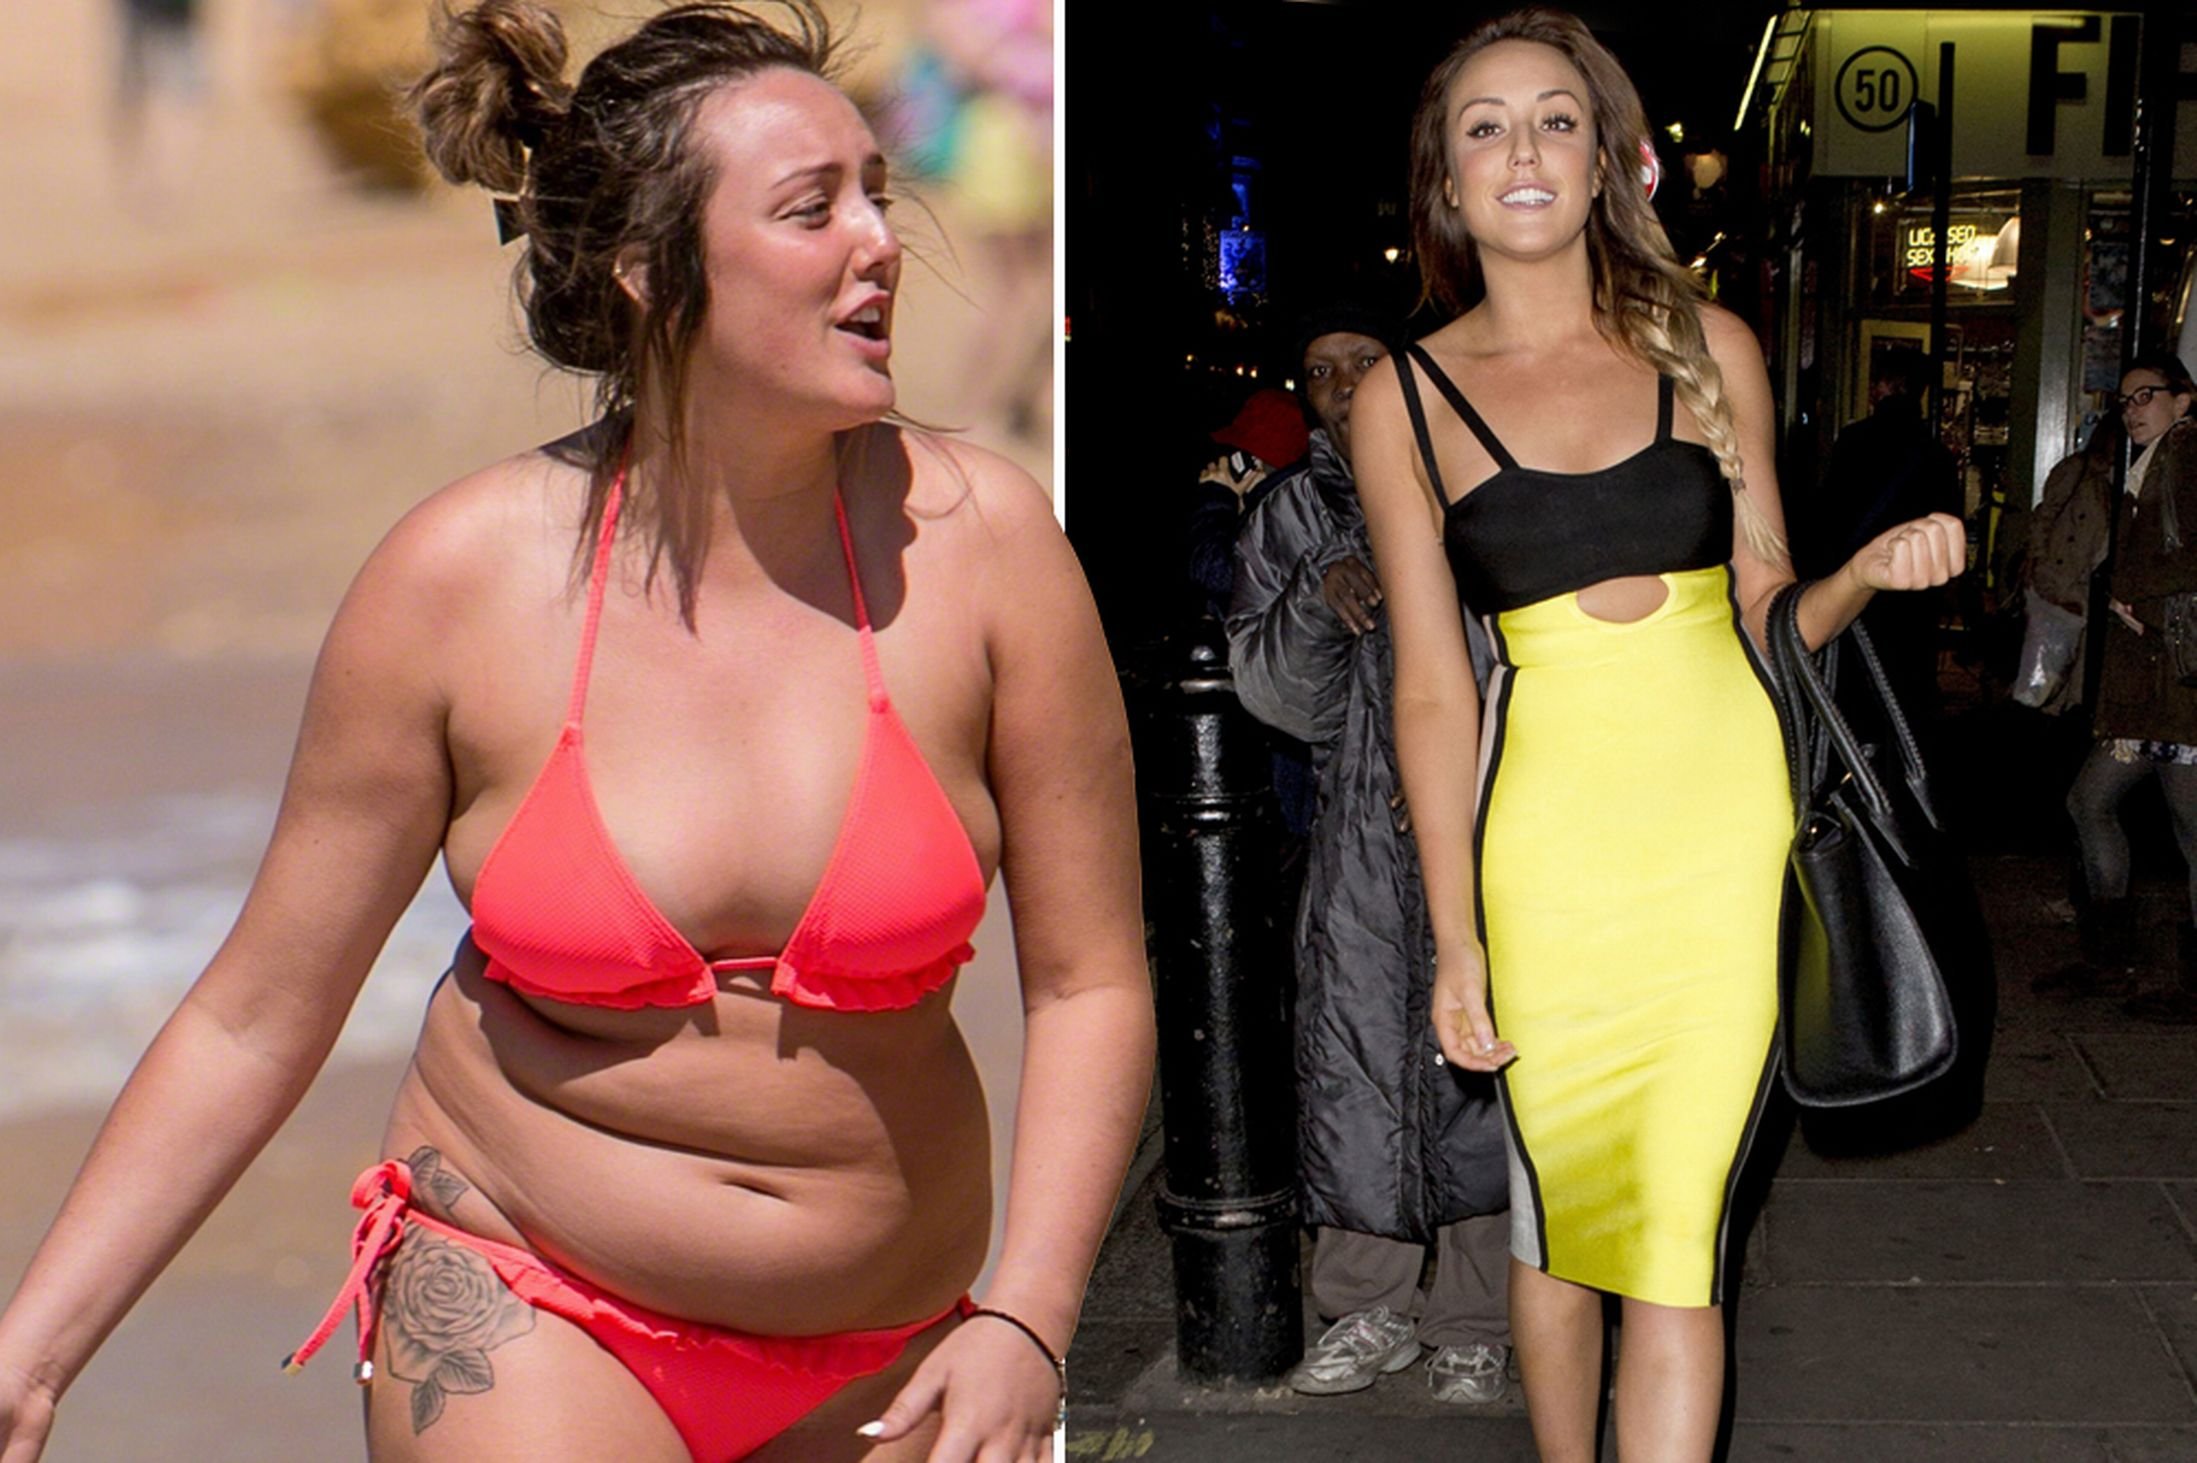 Showed new. Celebrities gained Weight. Charlotte Crosby fat belly. Celebrity Weight gain. Селебрити поправились.